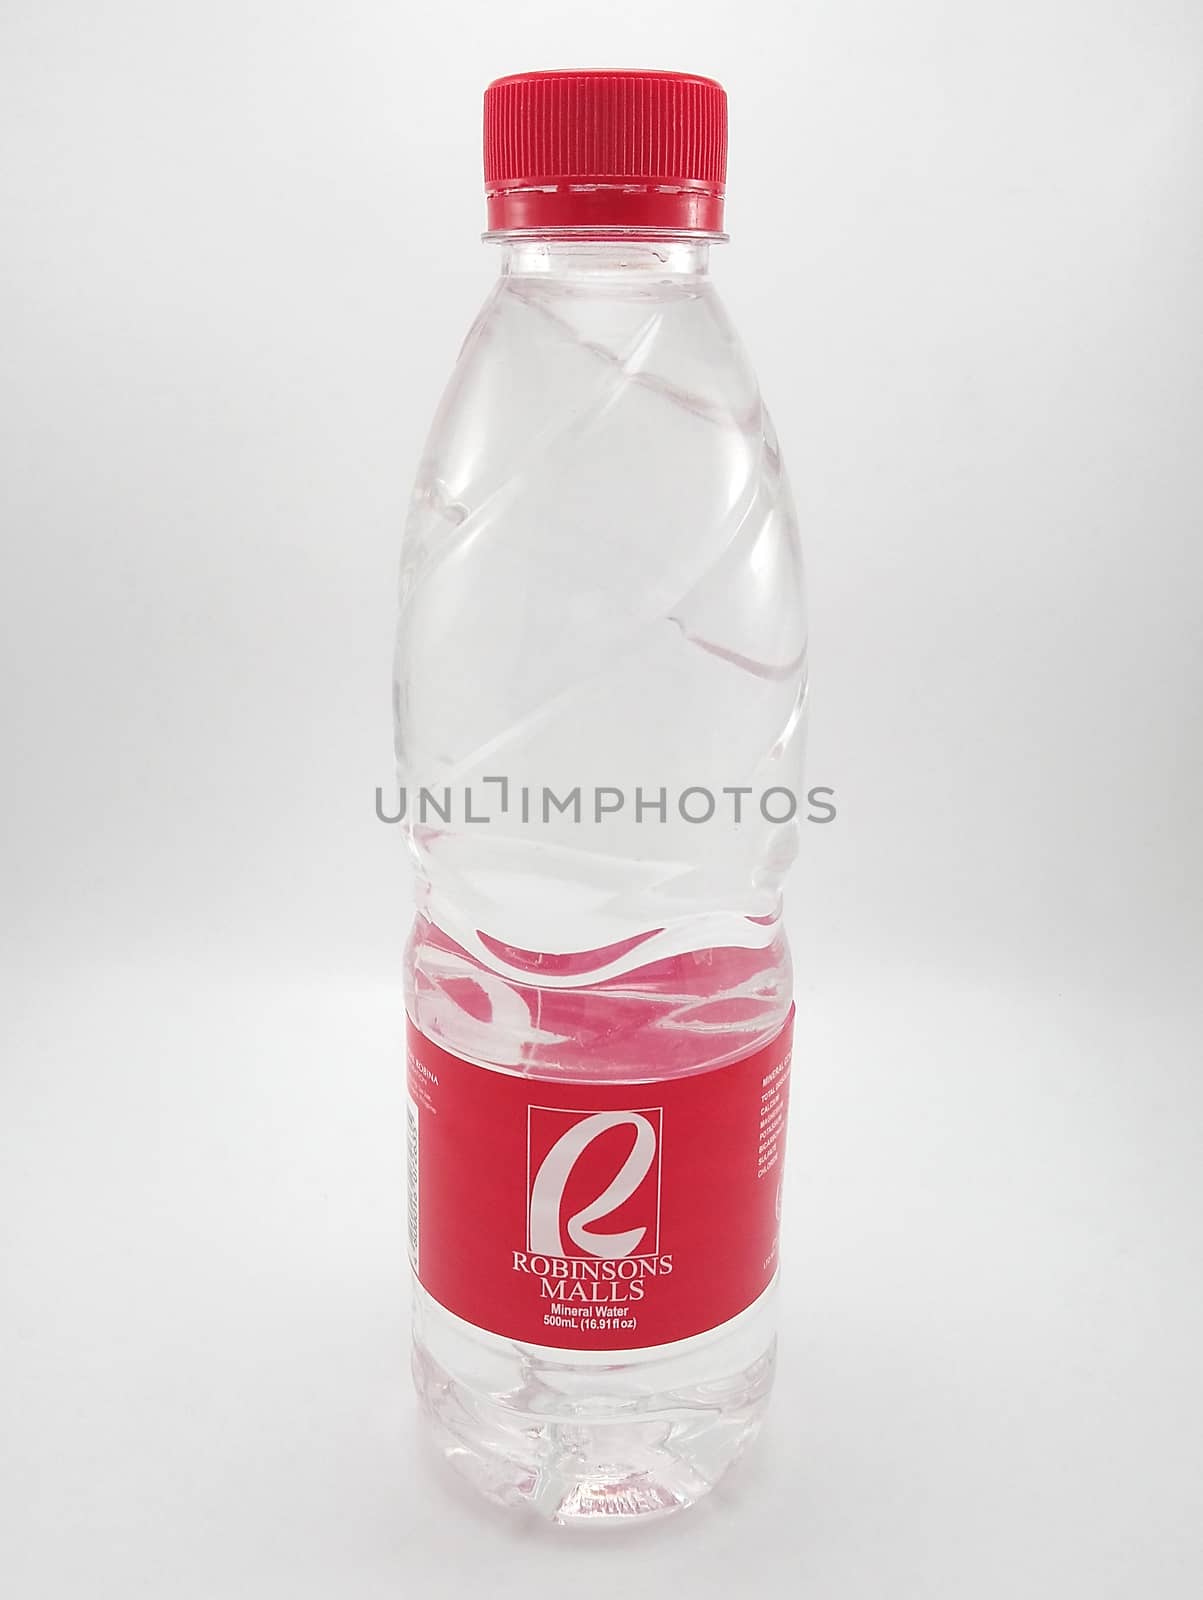 Robinsons malls mineral water in Manila, Philippines by imwaltersy